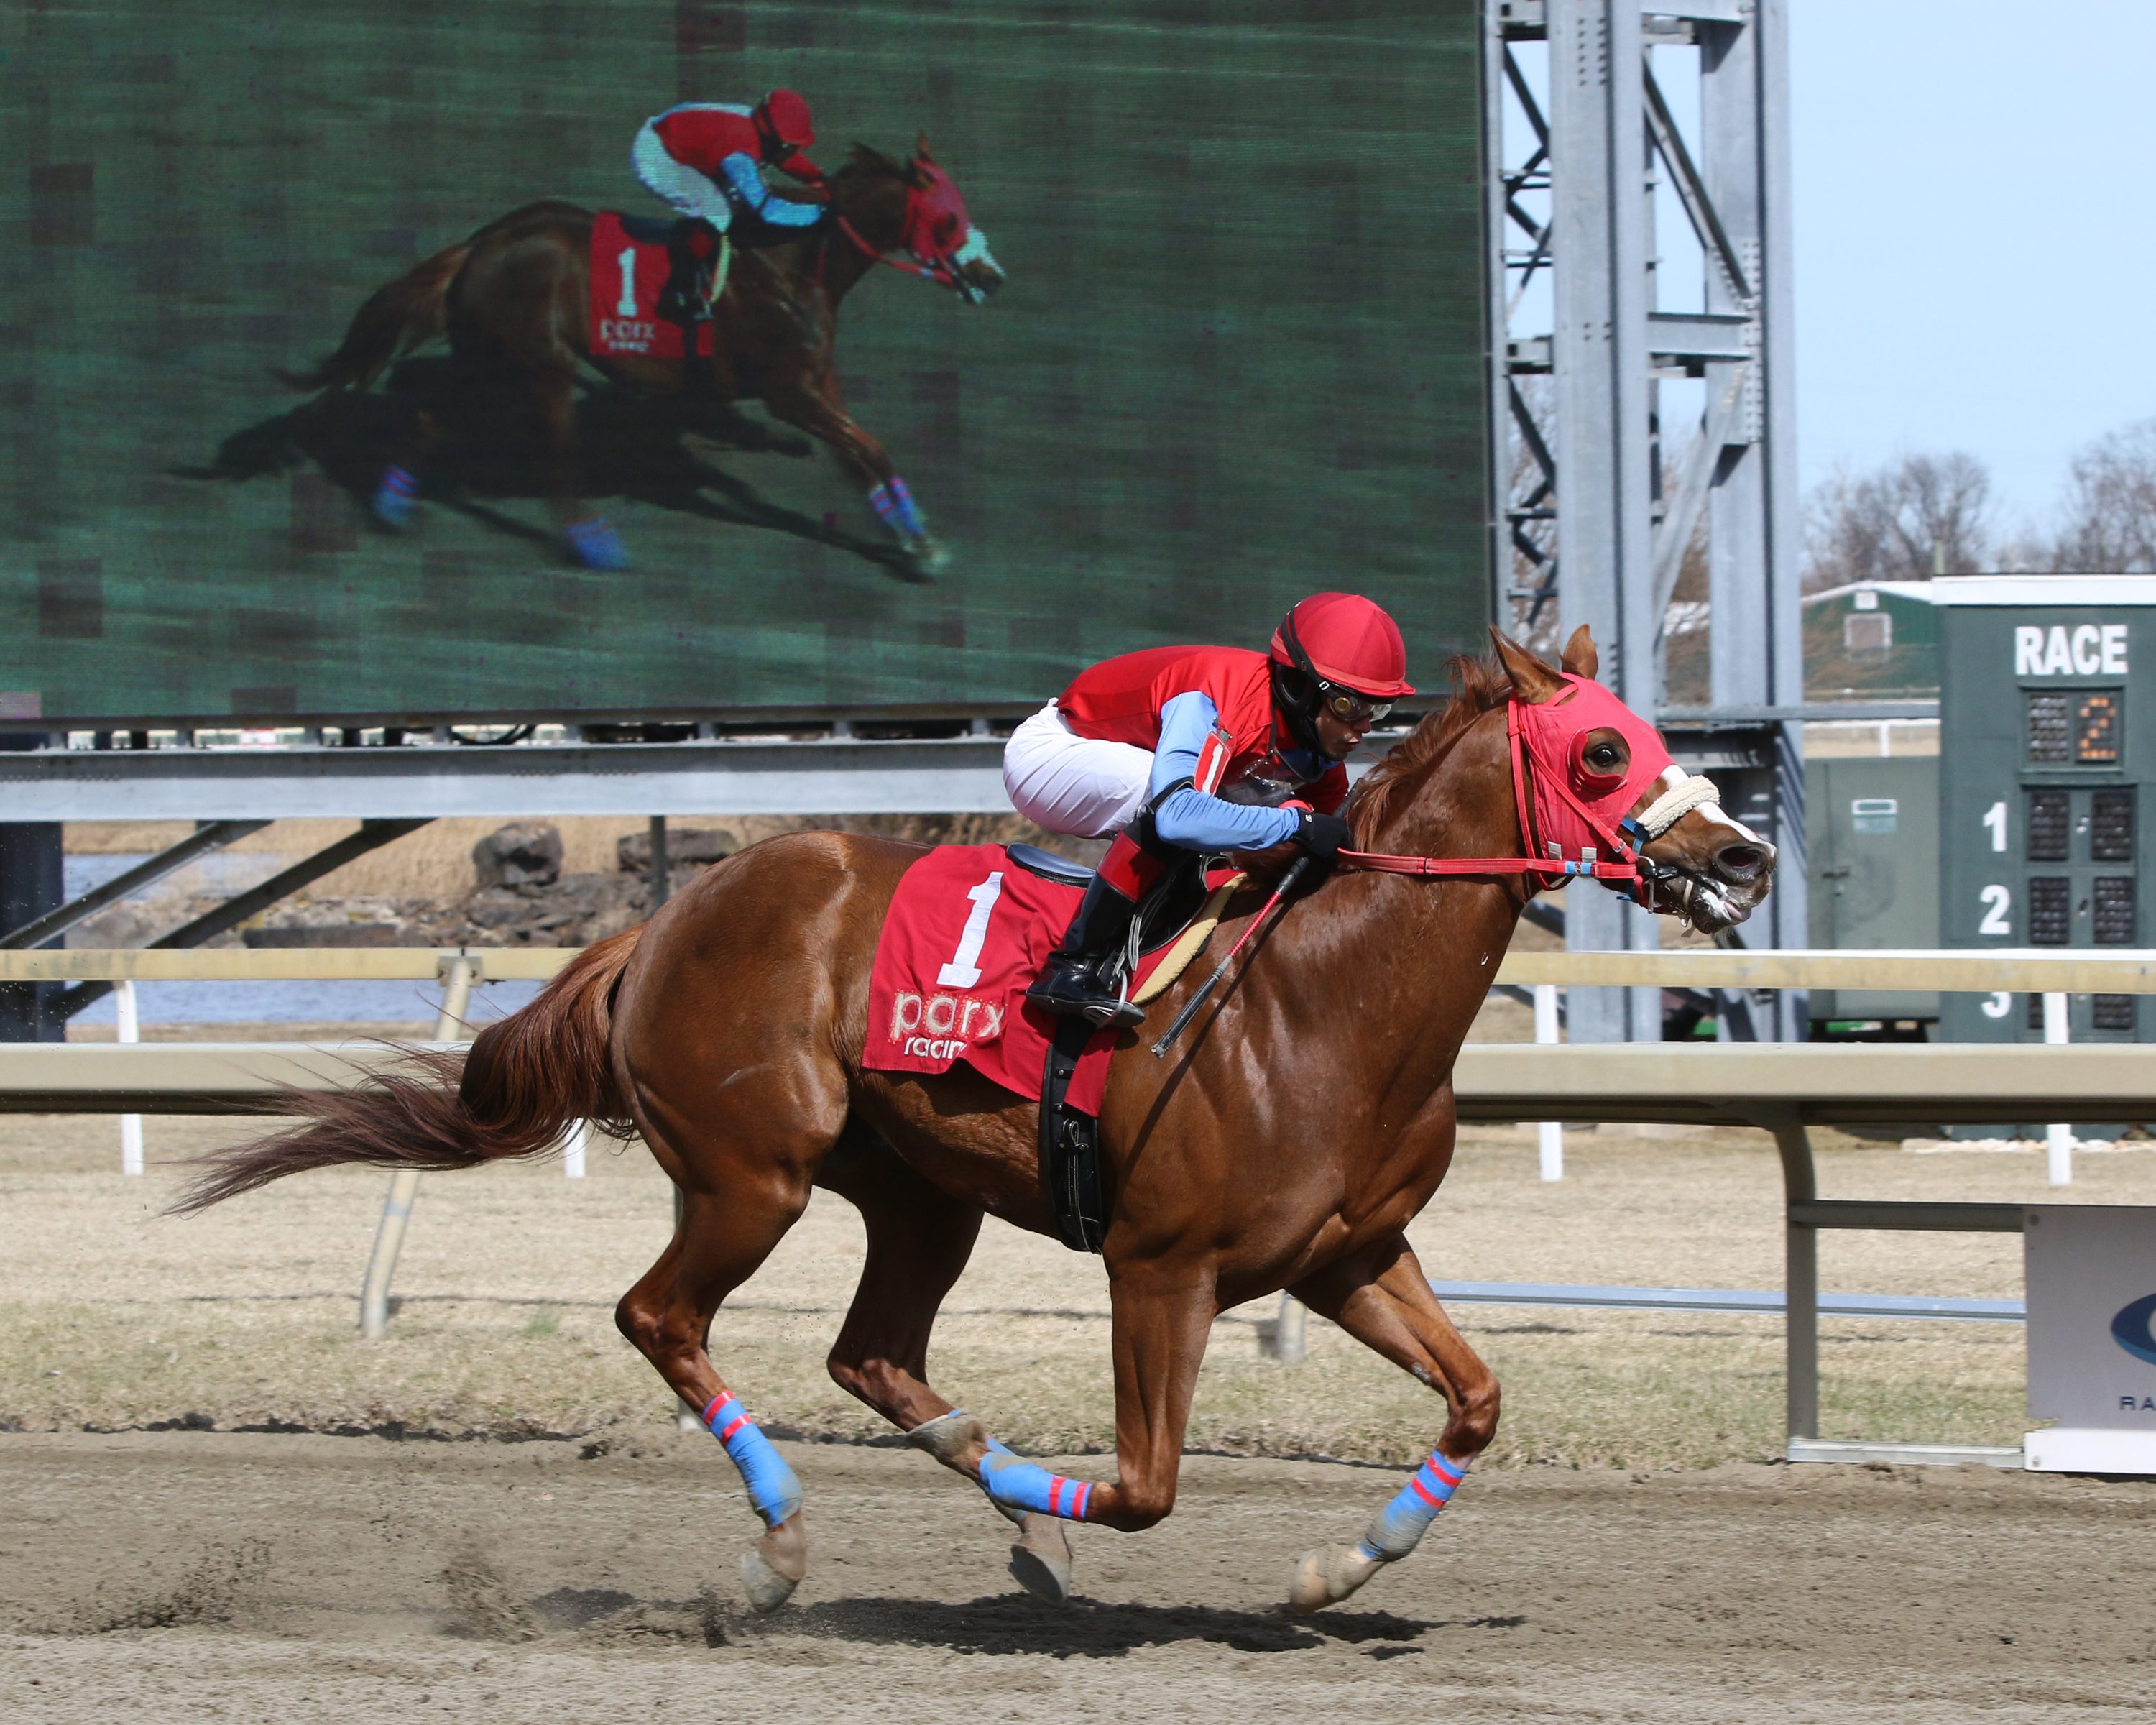 Mr Fantasy with Gerardo Milan win Race 2 at Parx on March 8, 2022. Photo By: Chad B. Harmon